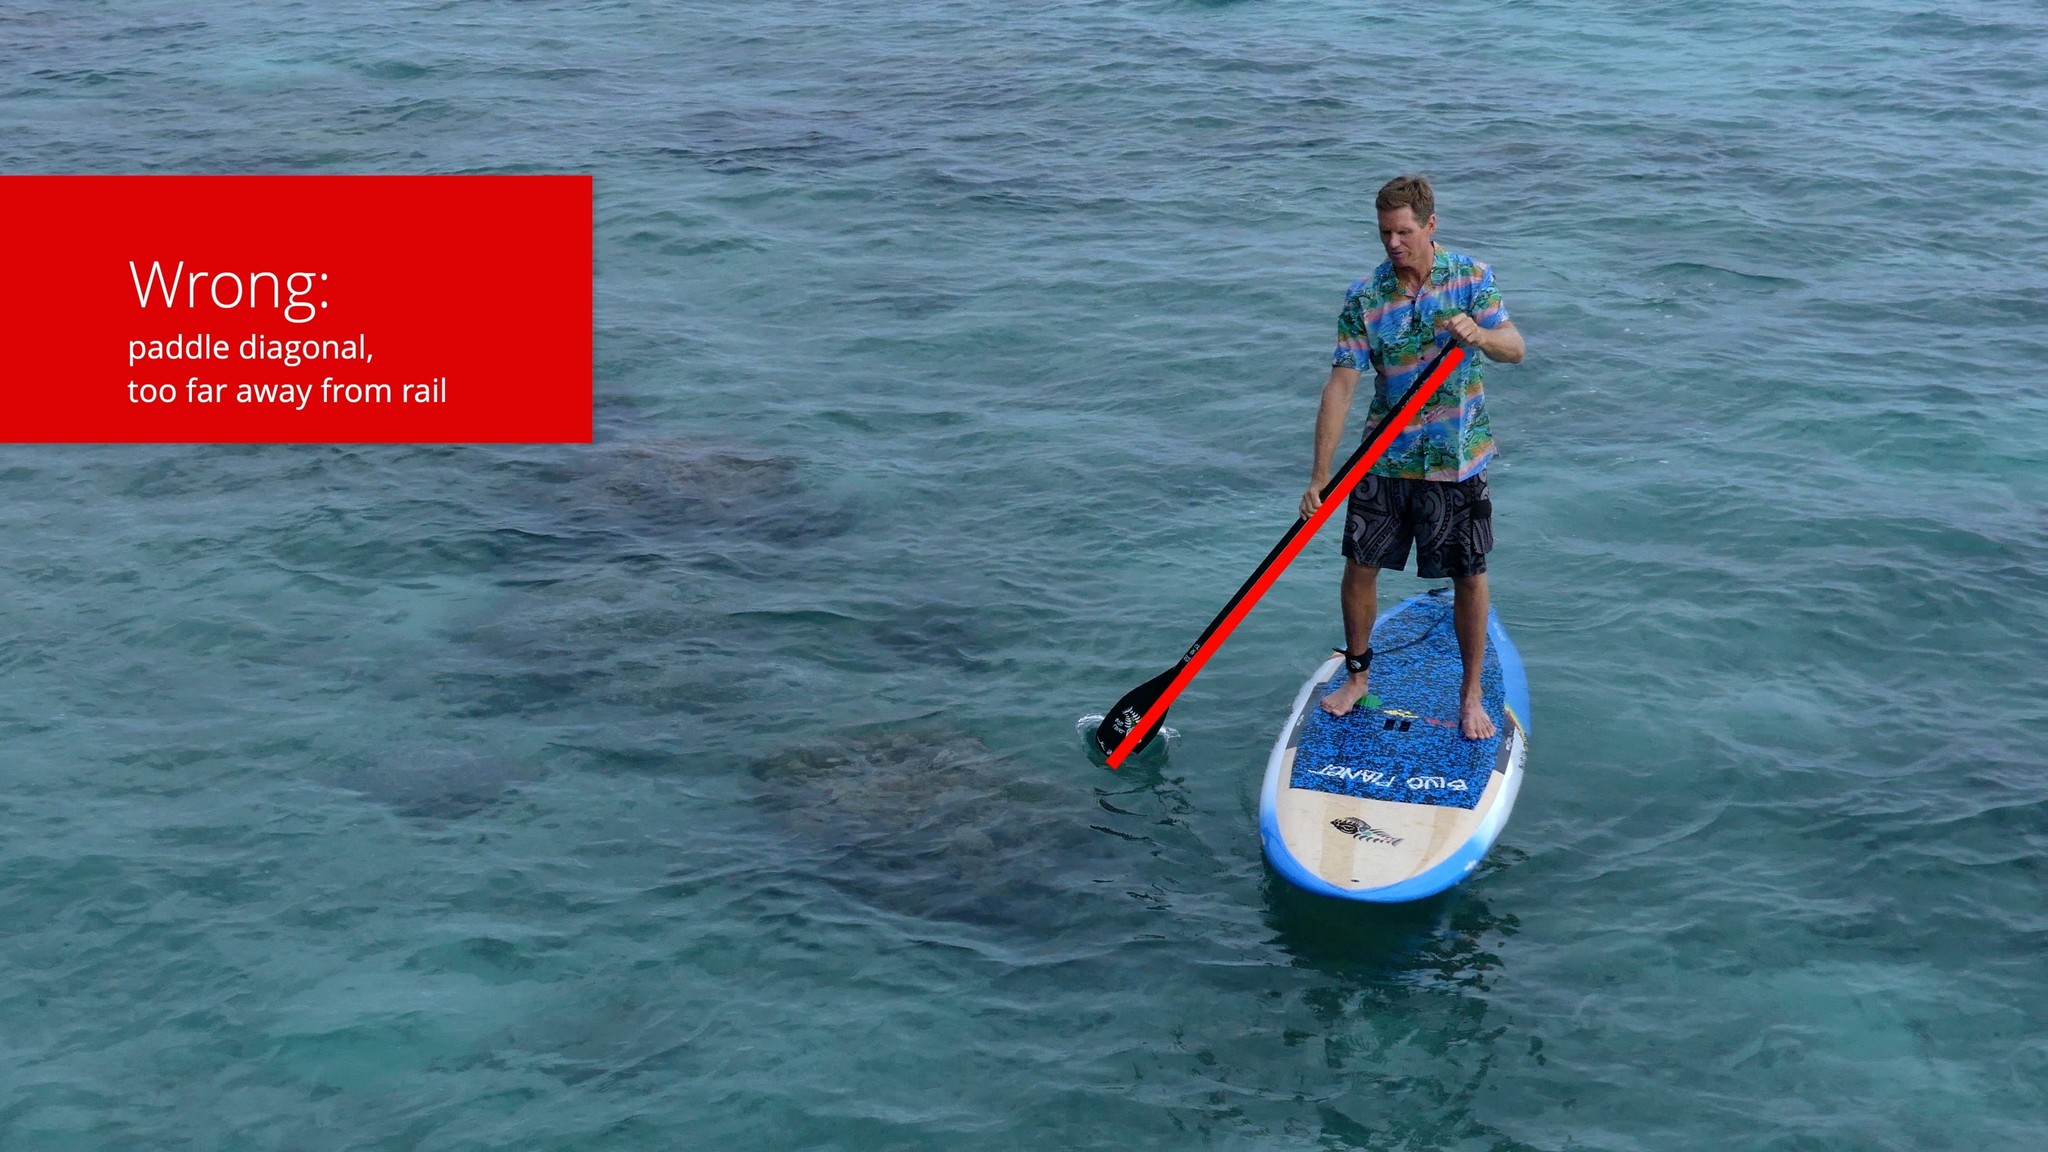 how to sup holding paddle diagonally